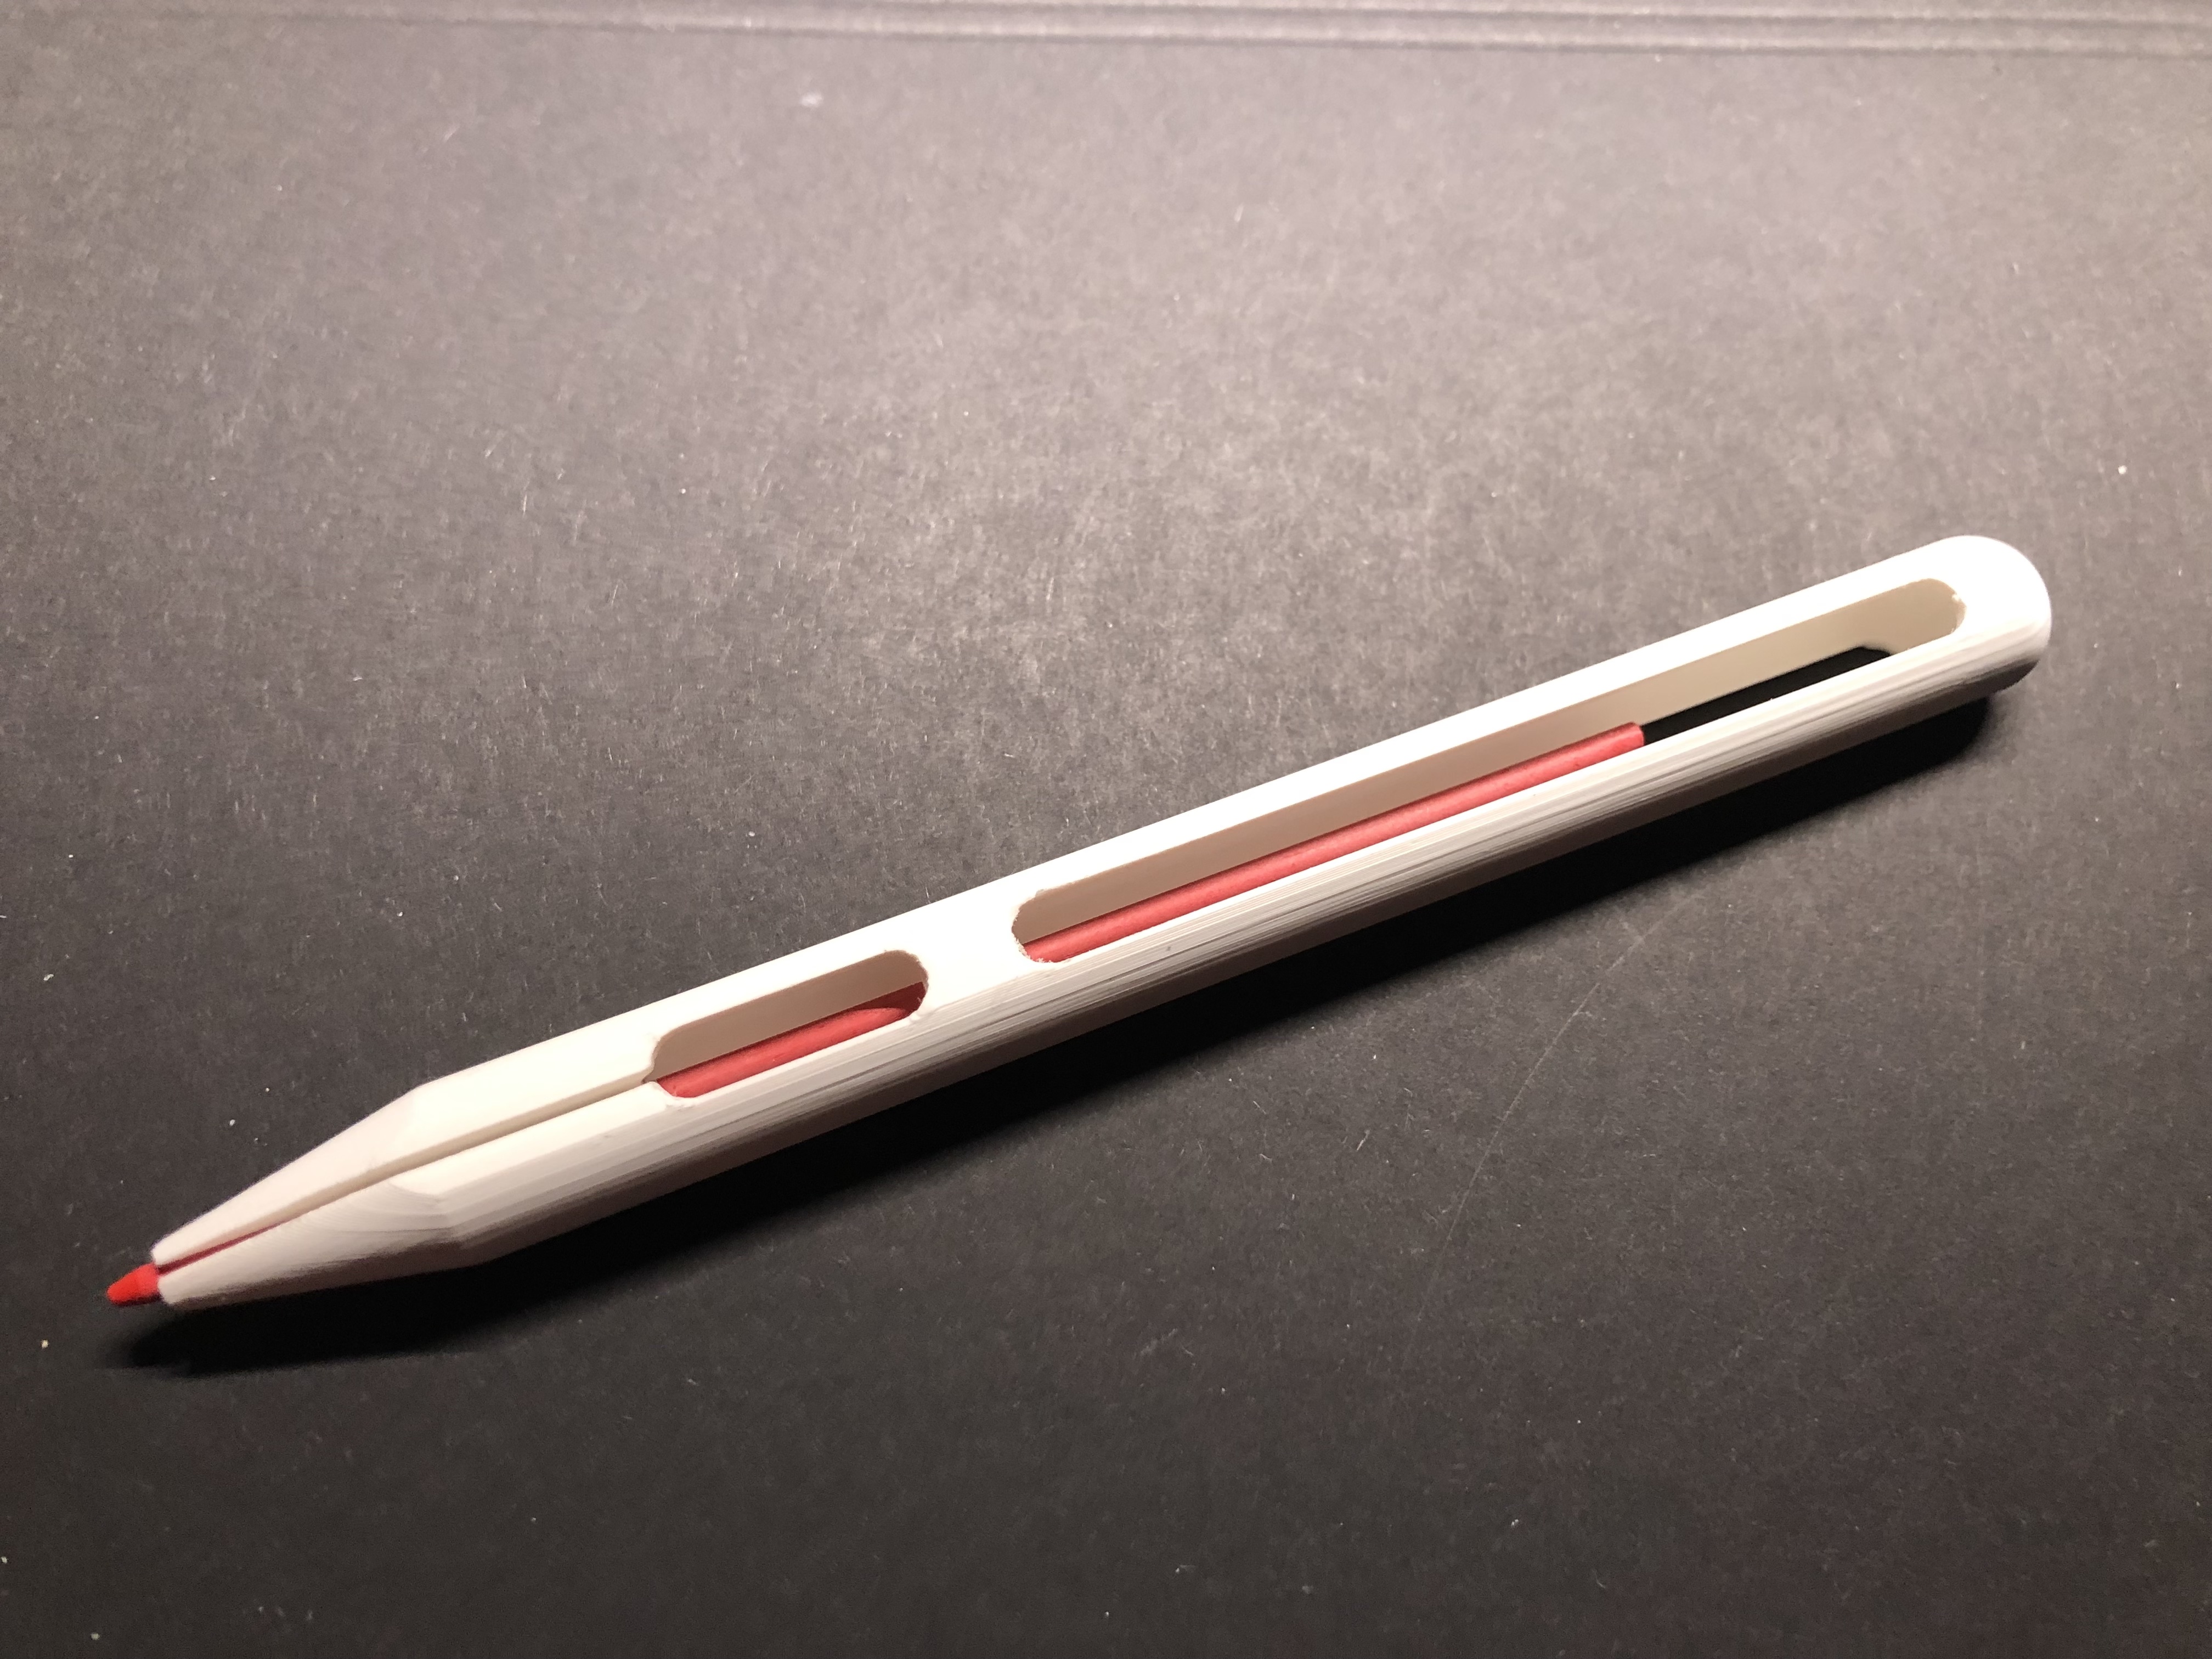 Flexible Pen with a simple design - works with 2,8mm Pica leads